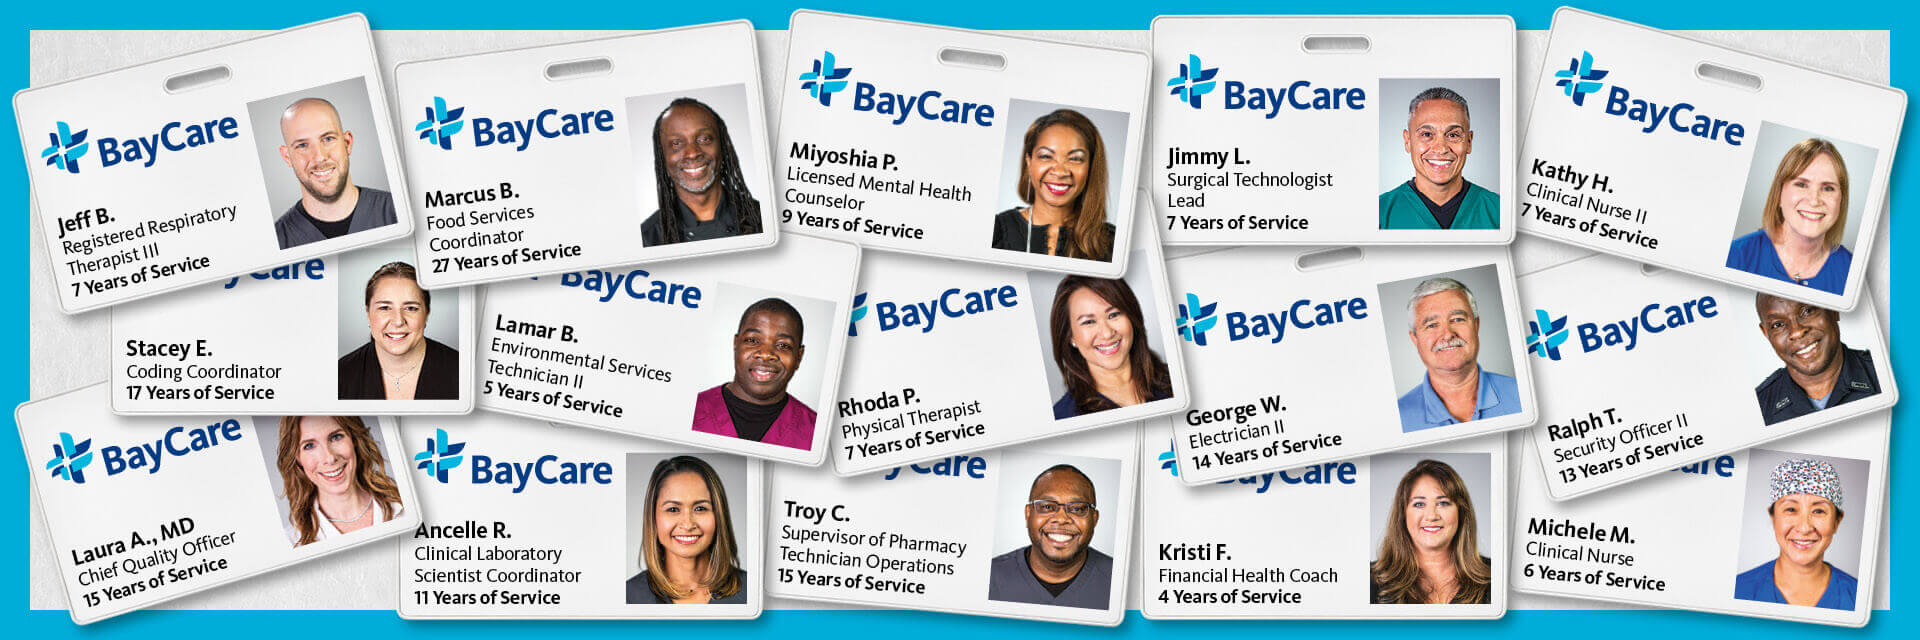 badges of Baycare team members with longevity of service